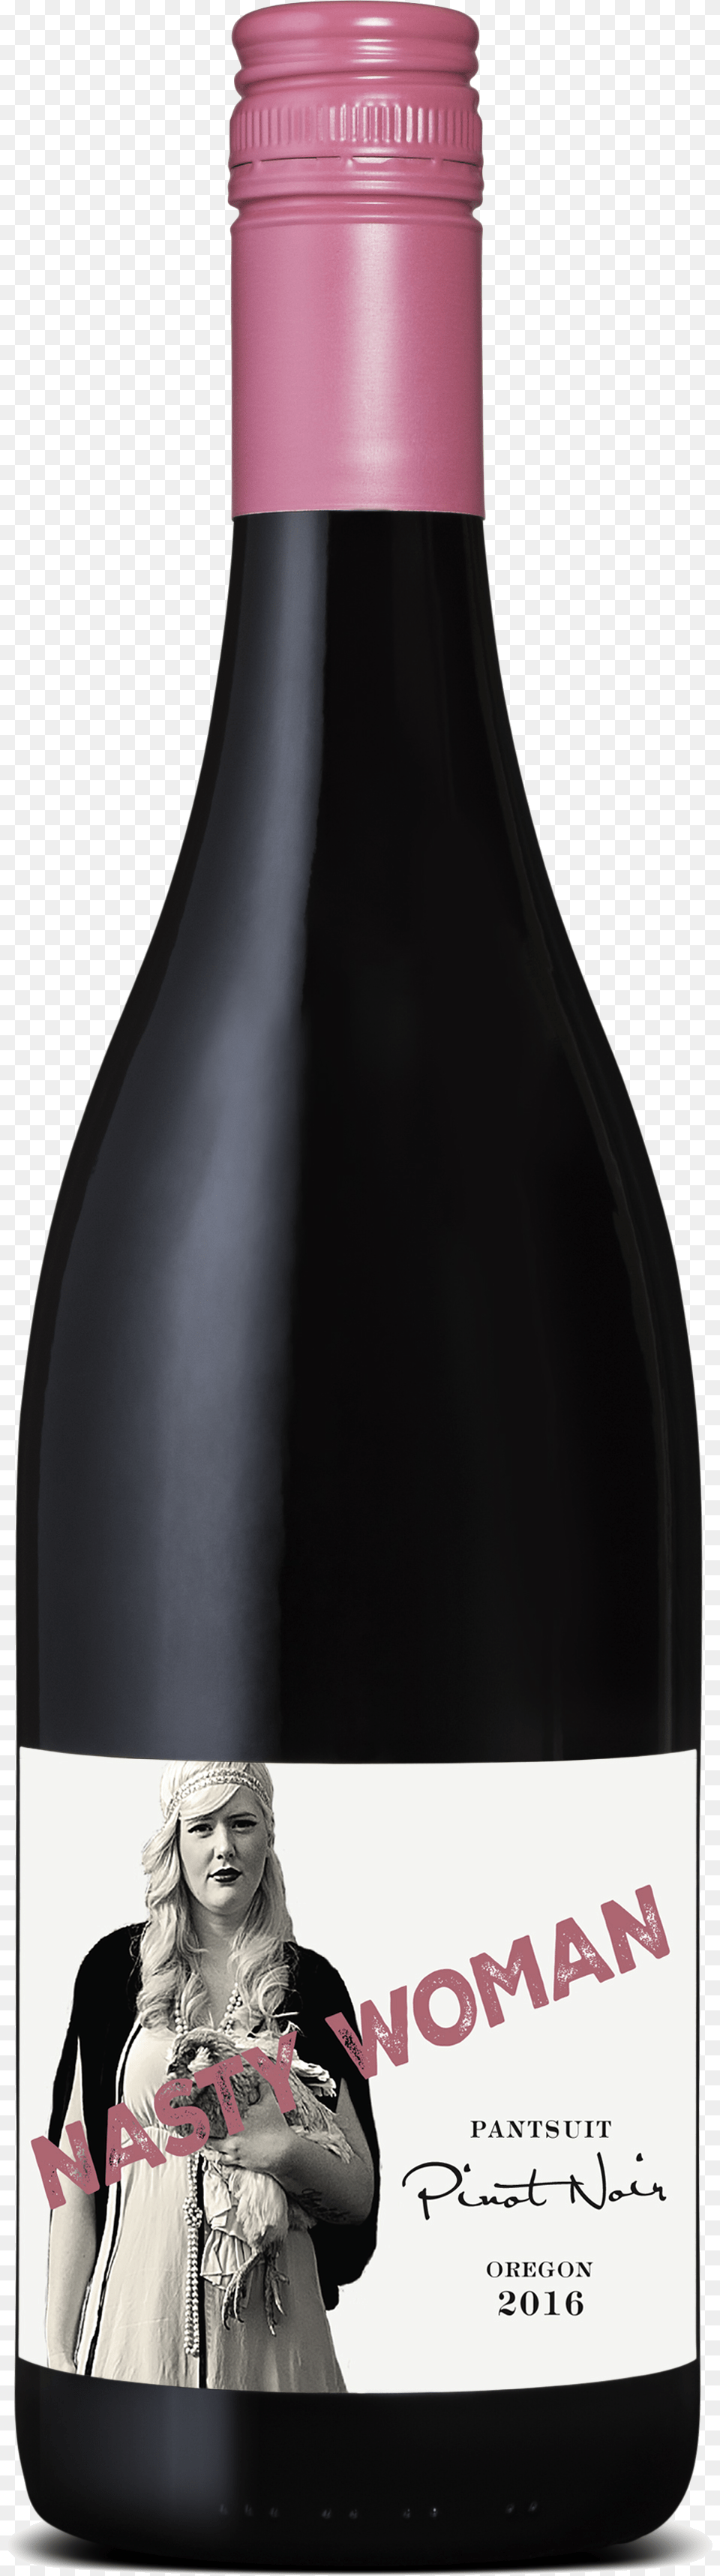 Chelsea Boot, Adult, Wine Bottle, Wine, Wedding Free Transparent Png